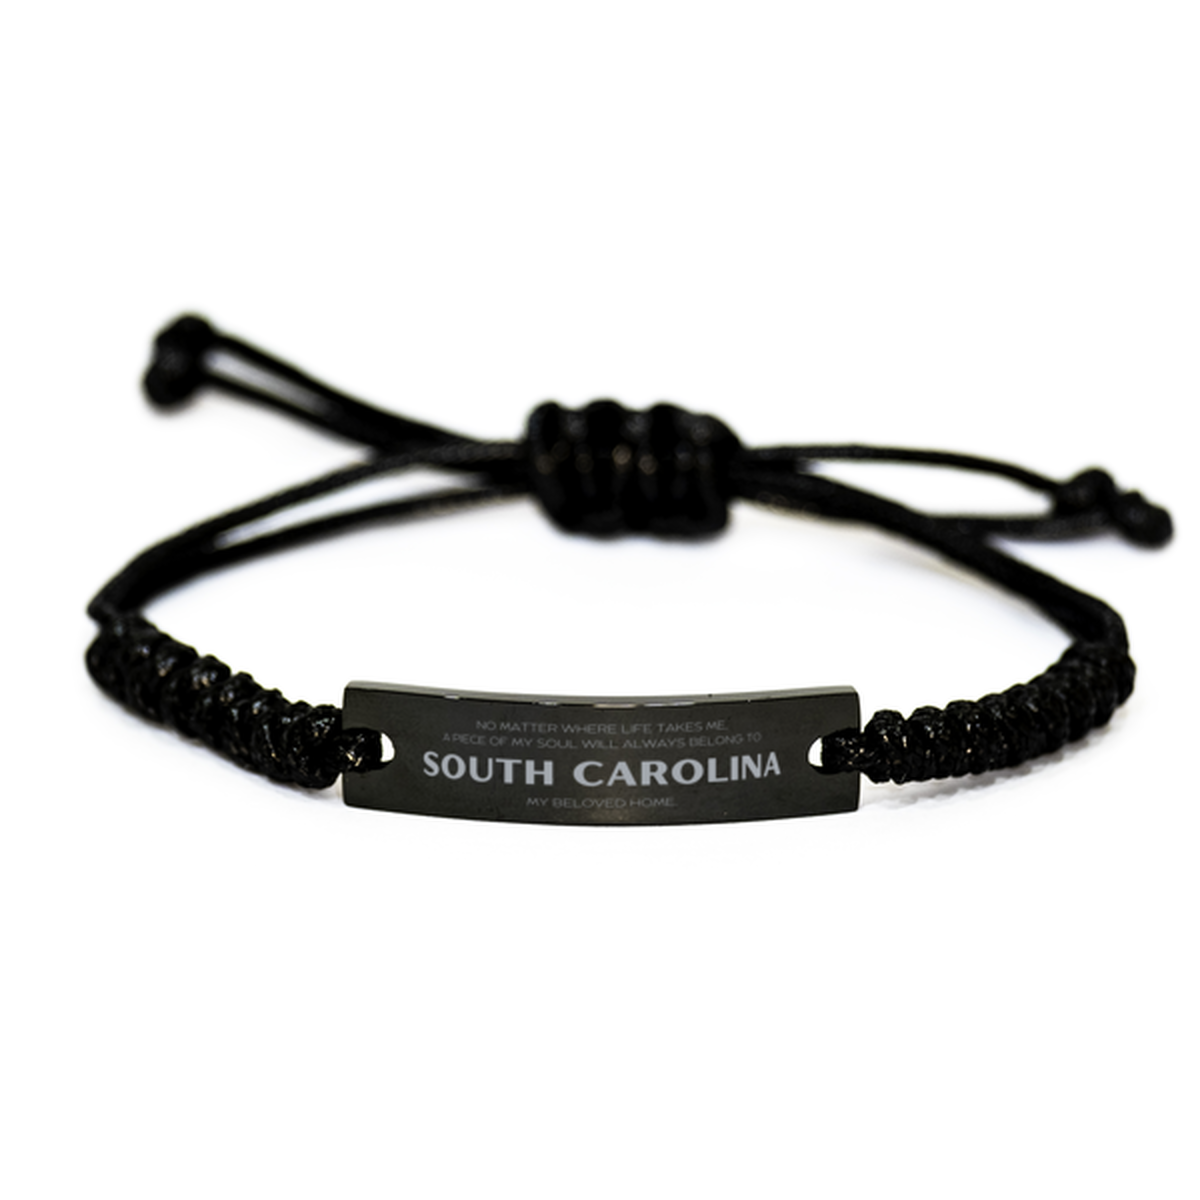 Love South Carolina State Gifts, My soul will always belong to South Carolina, Proud Black Rope Bracelet, Birthday Unique Gifts For South Carolina Men, Women, Friends